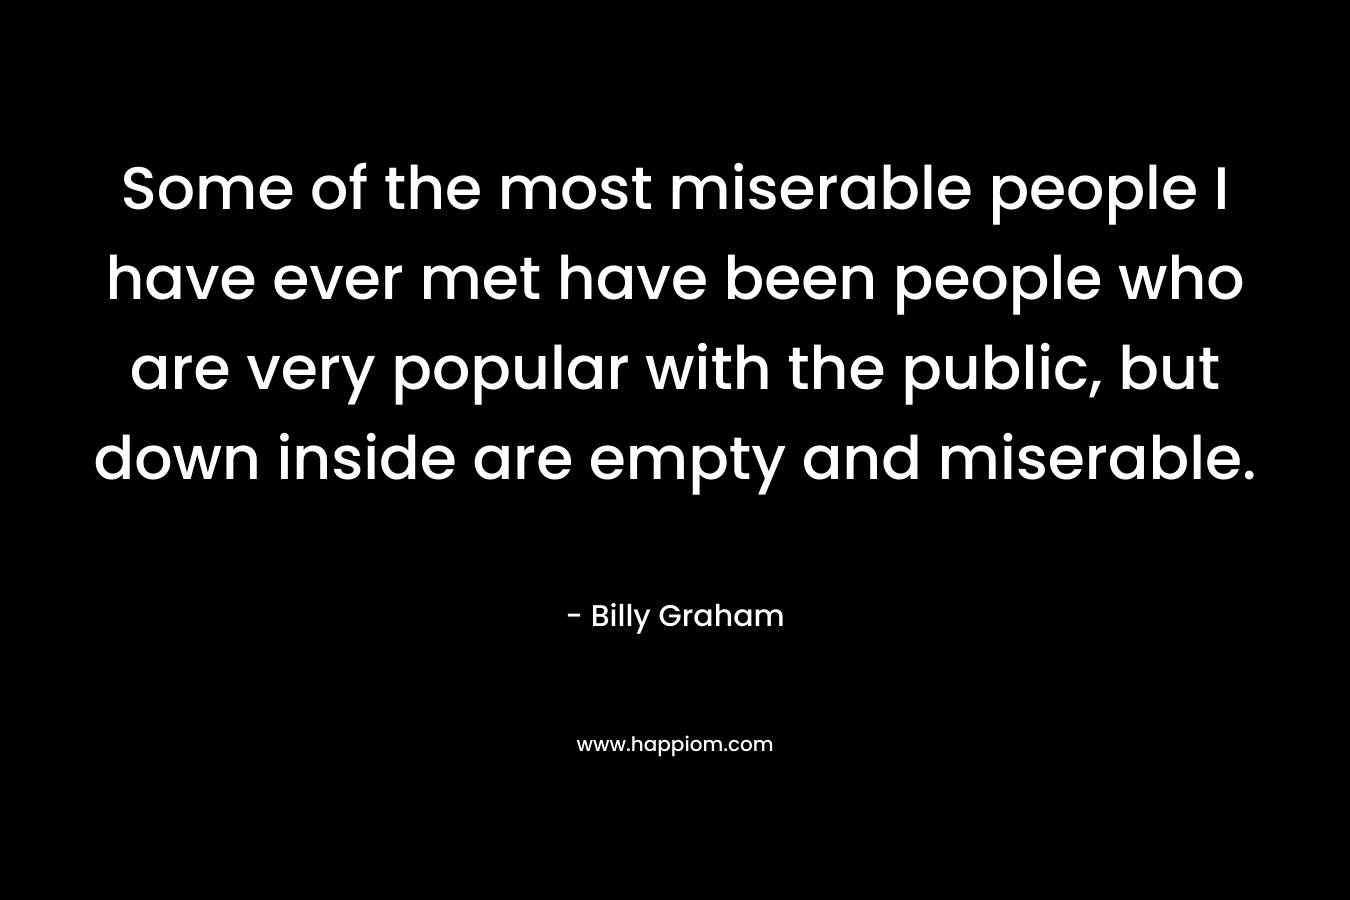 Some of the most miserable people I have ever met have been people who are very popular with the public, but down inside are empty and miserable.